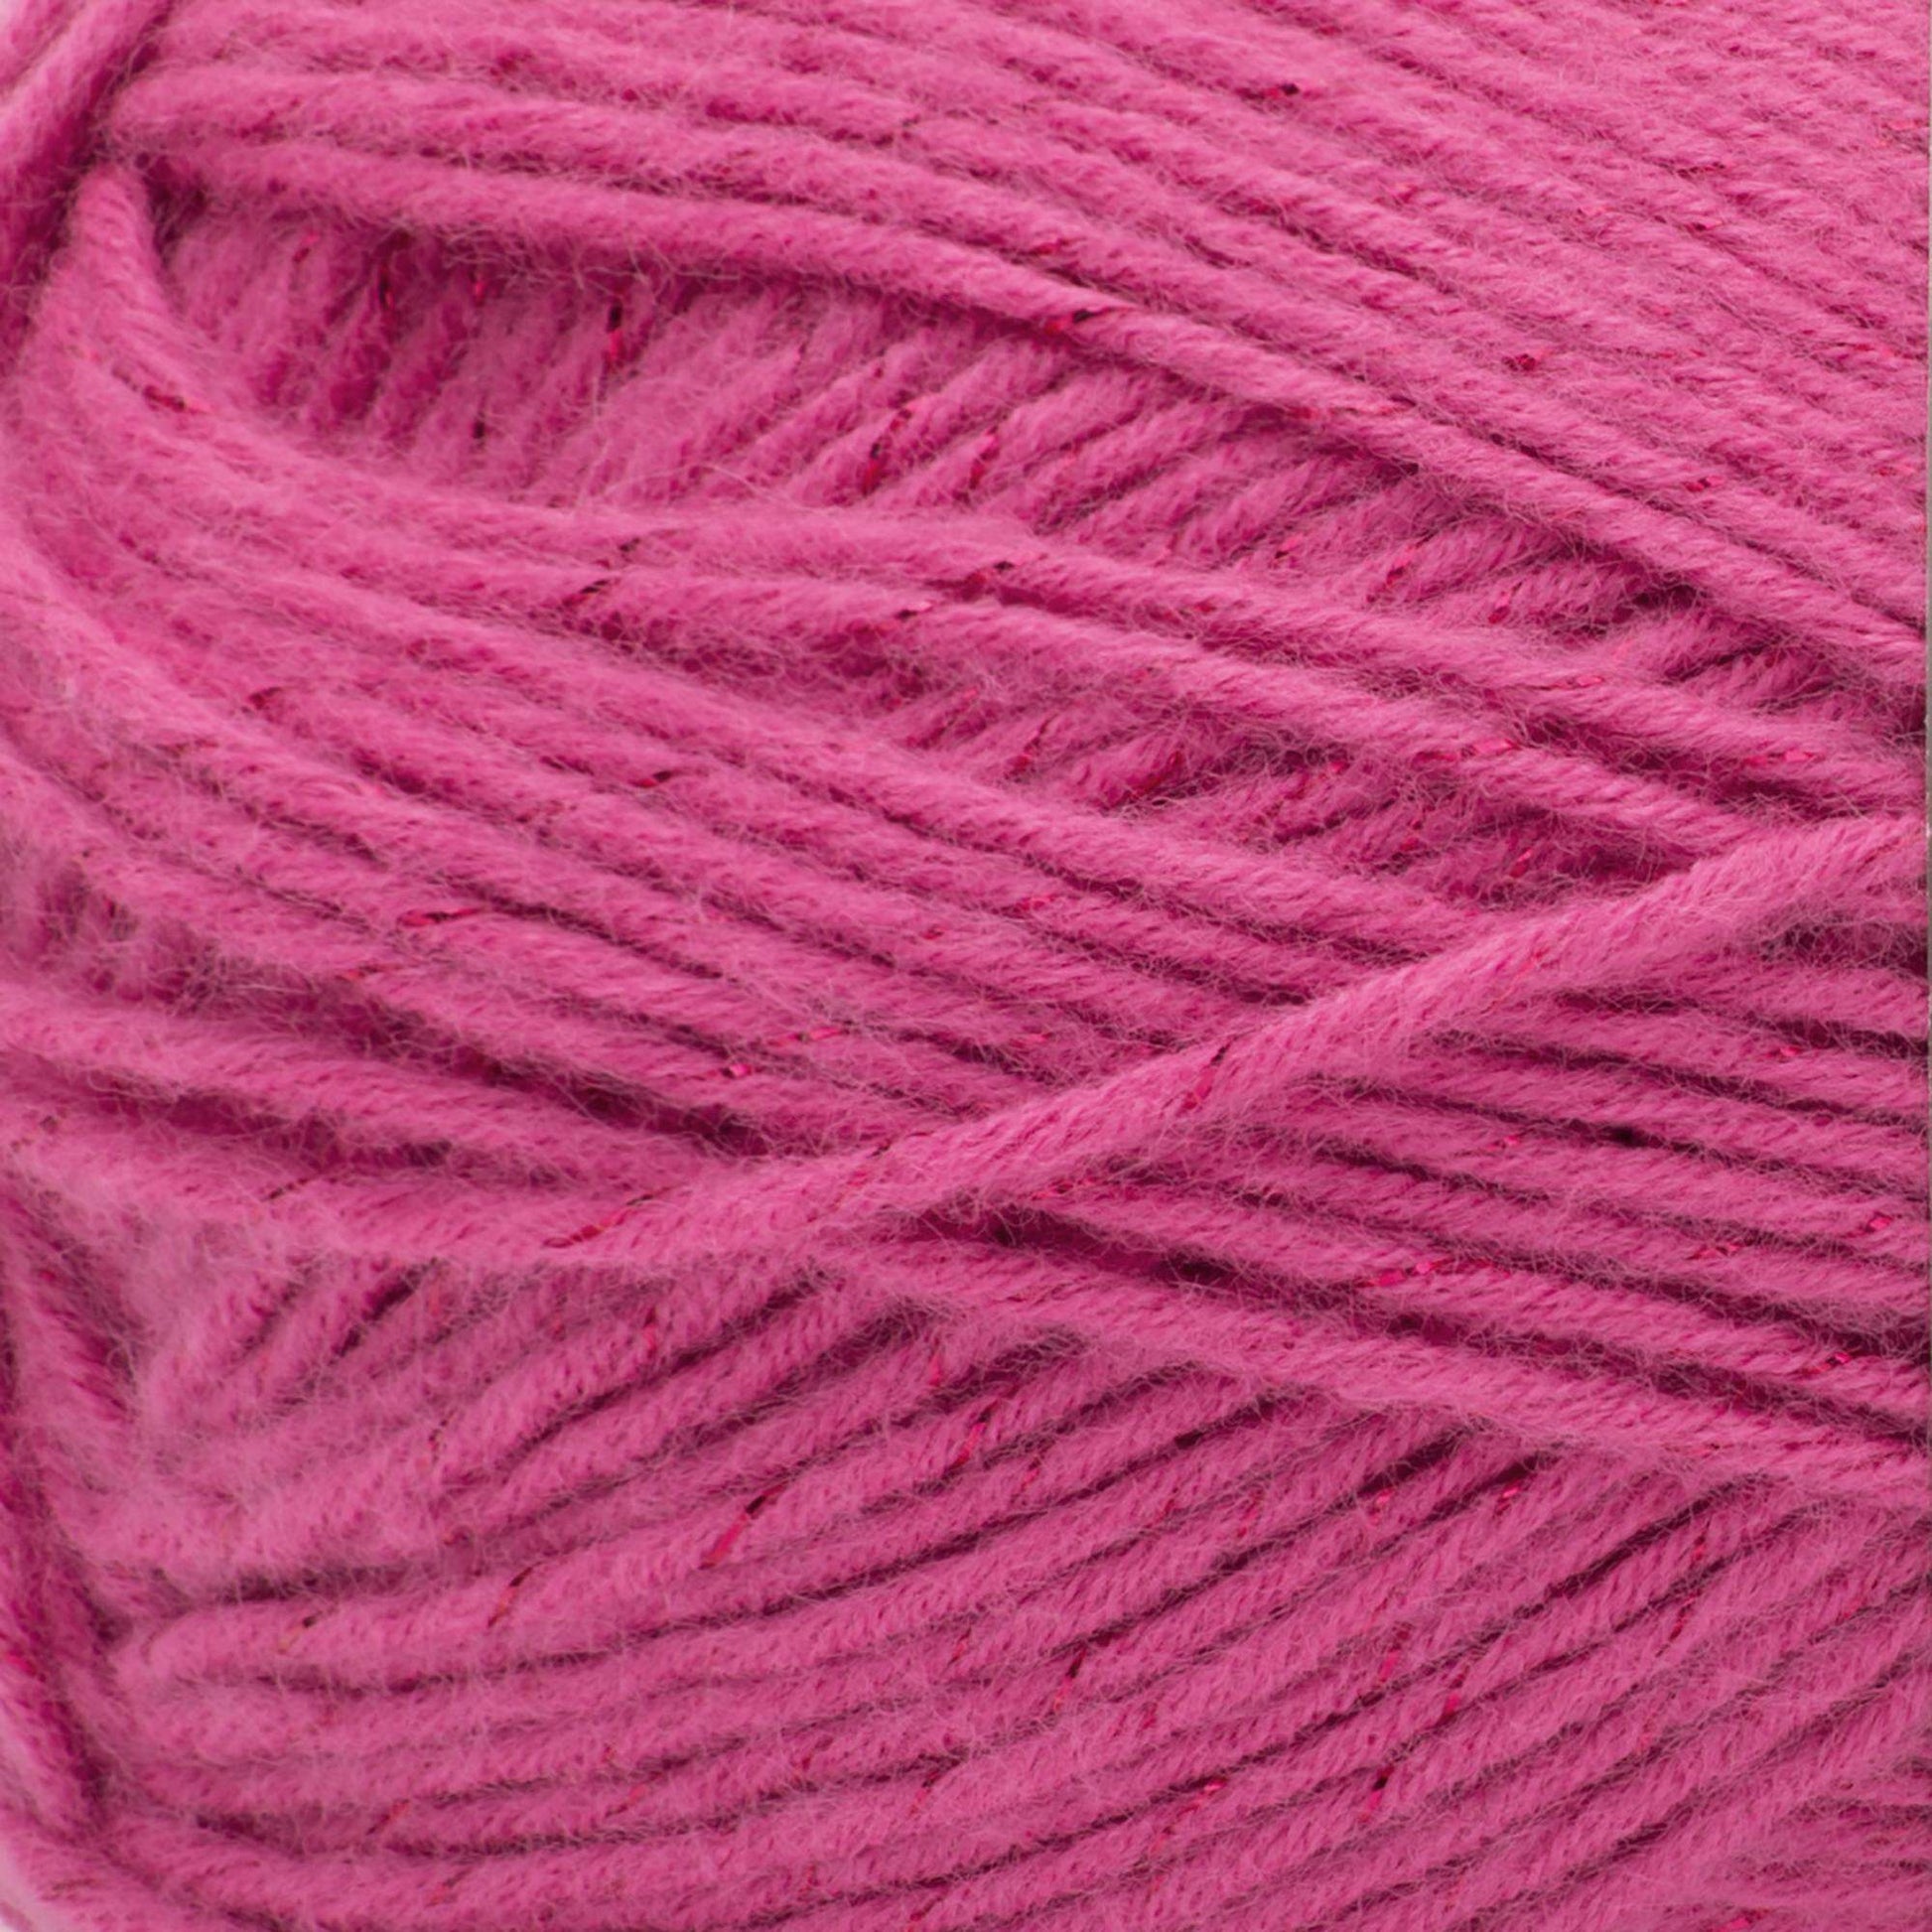 Red Heart Hygge Charm Yarn - Discontinued shades